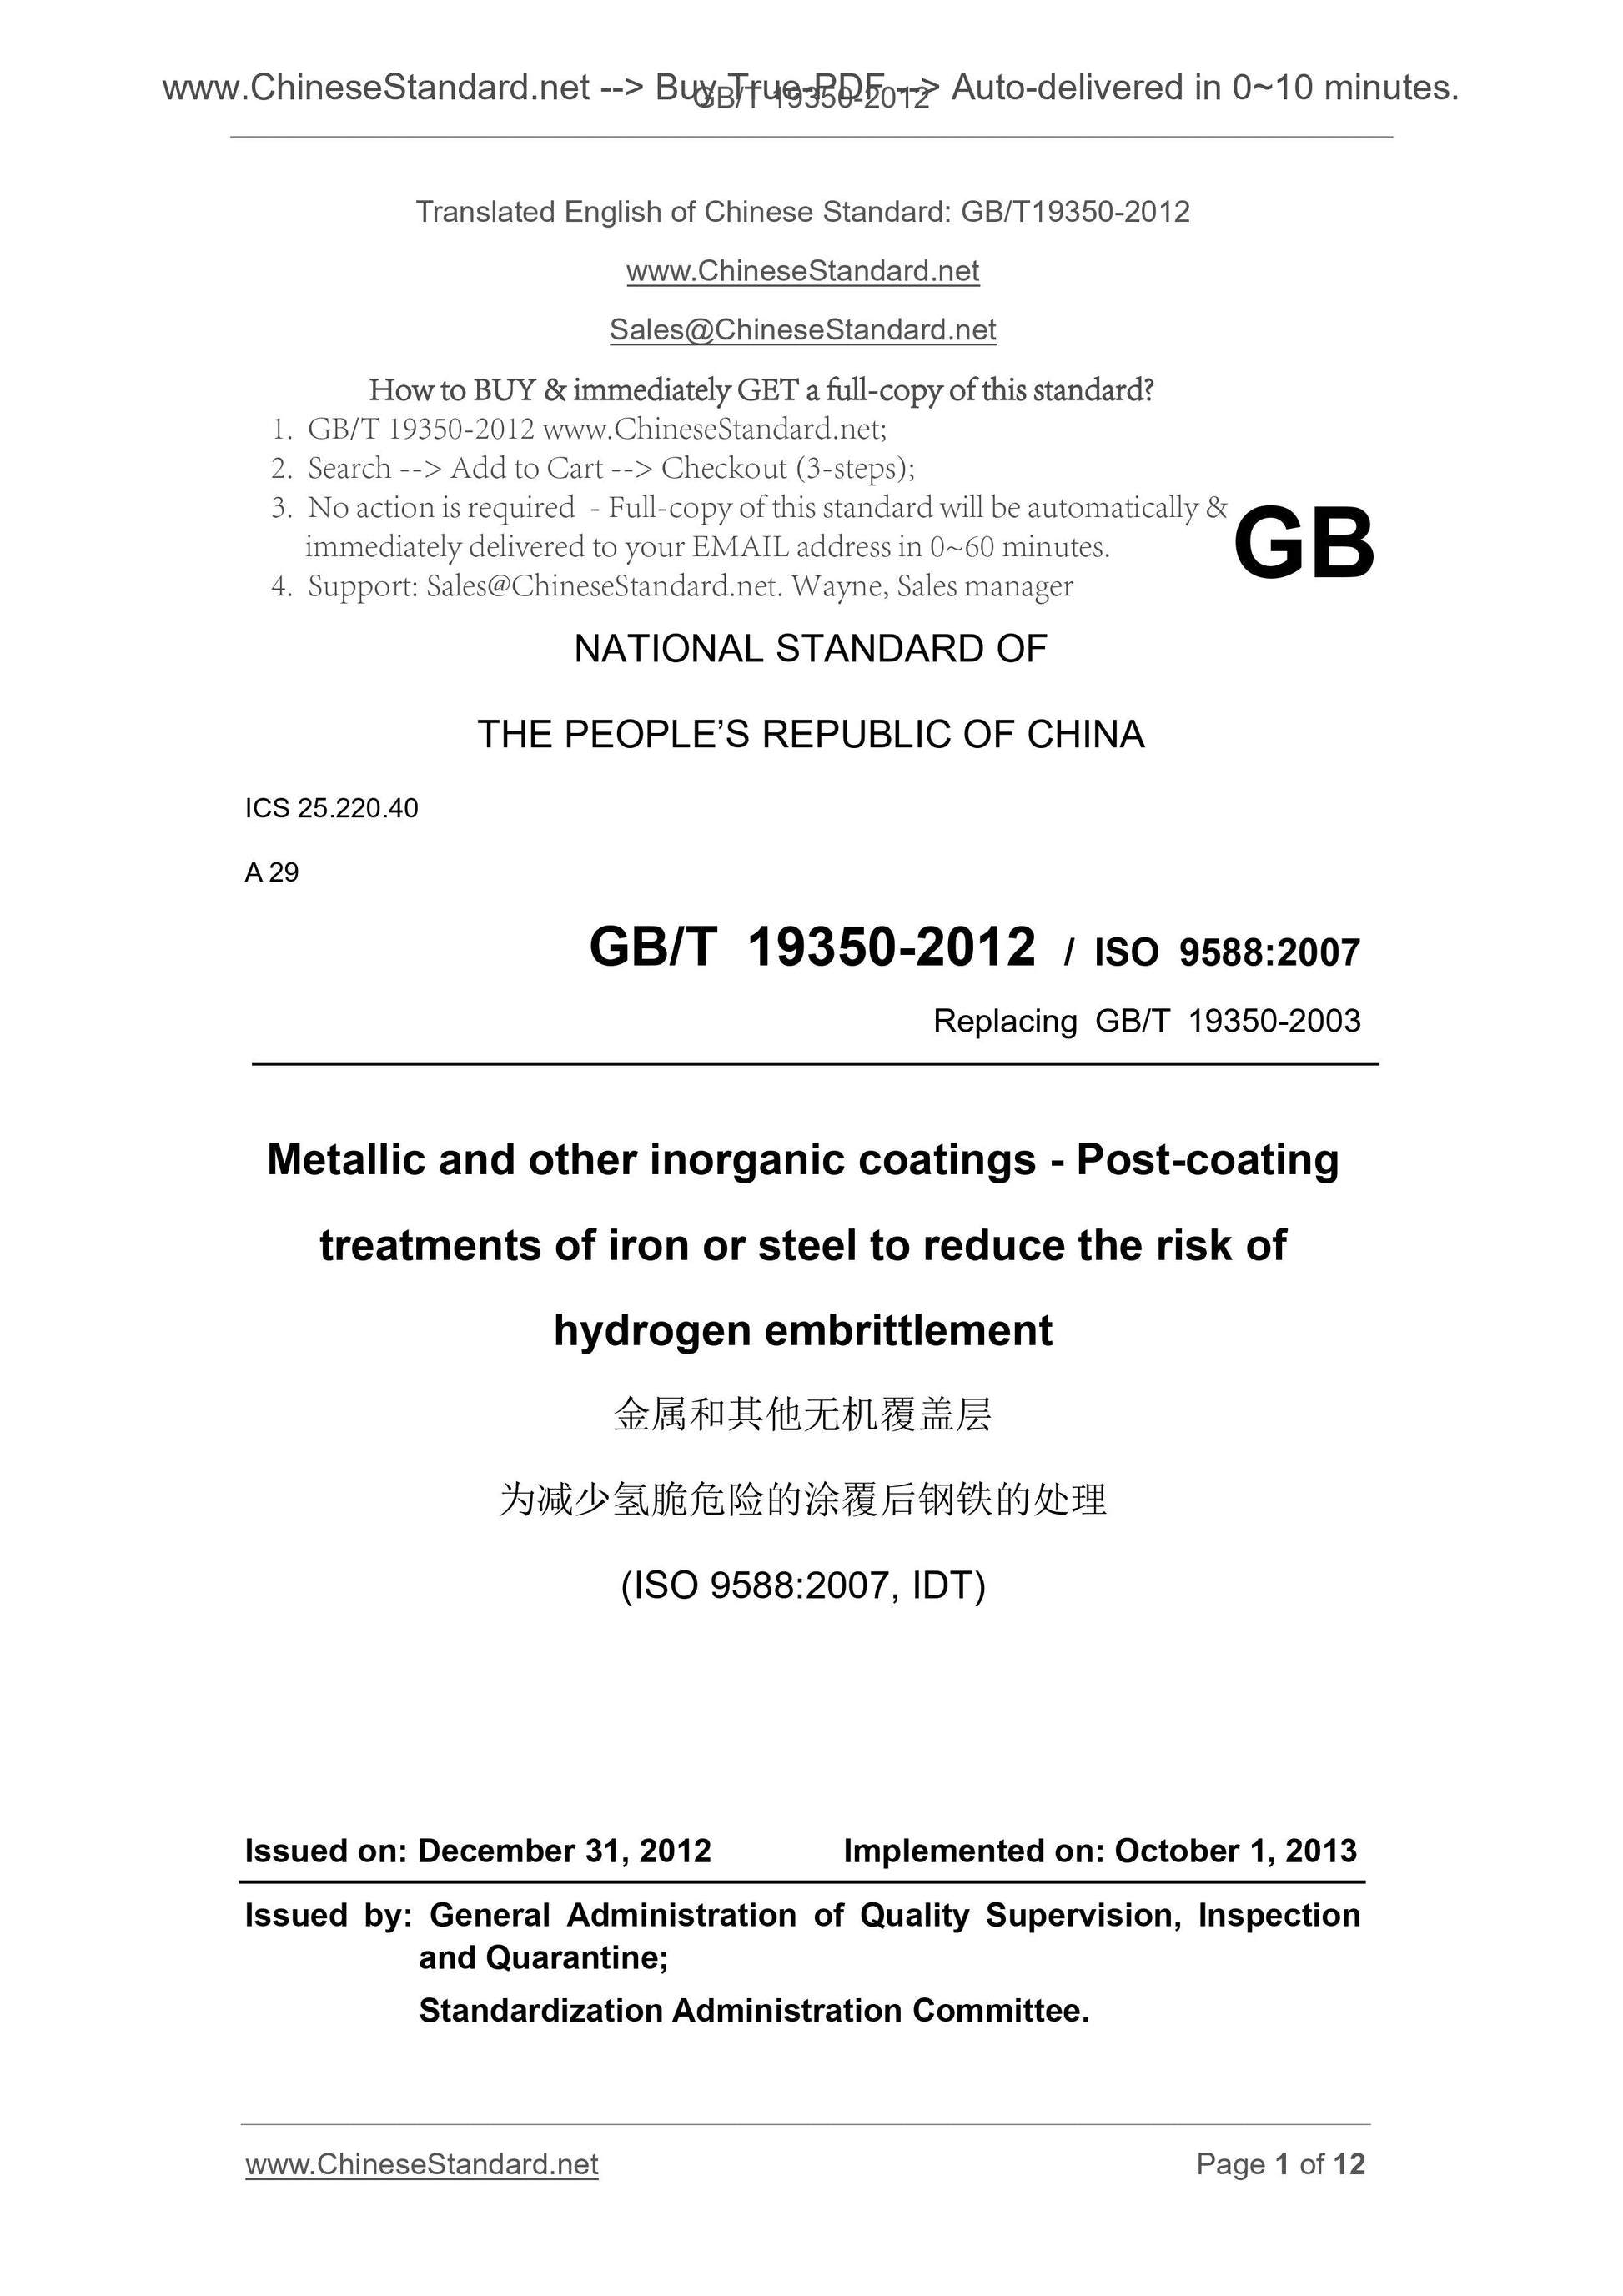 GB/T 19350-2012 Page 1